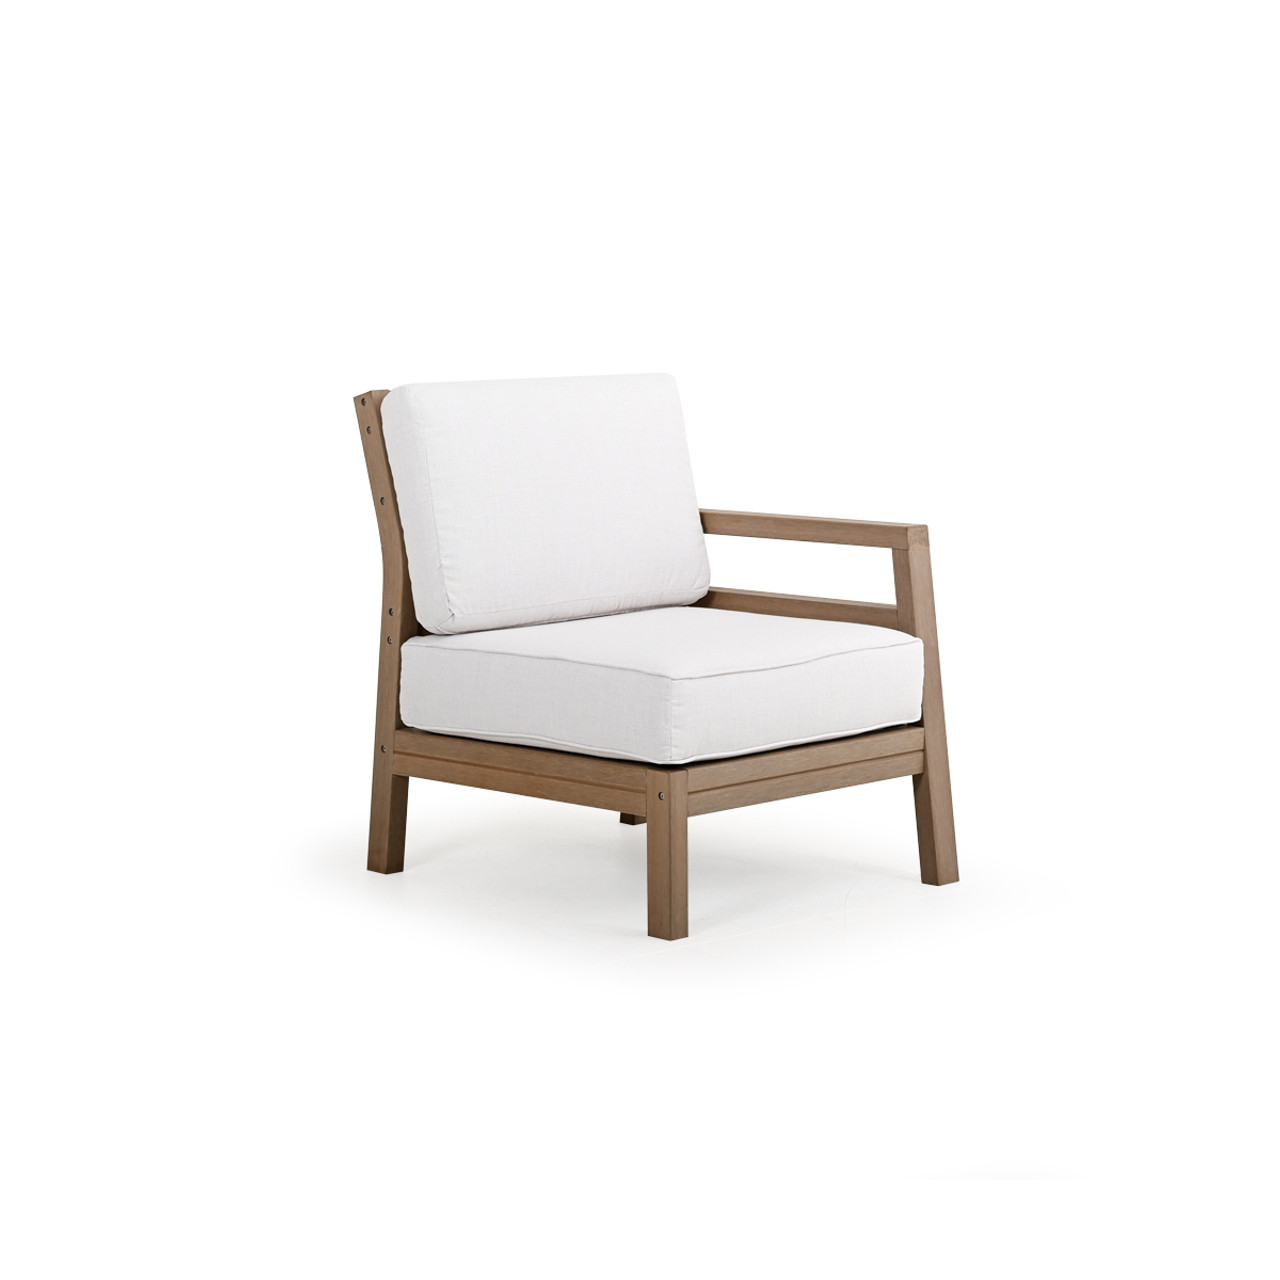 Southerland Teak Wood Chair with Cushion